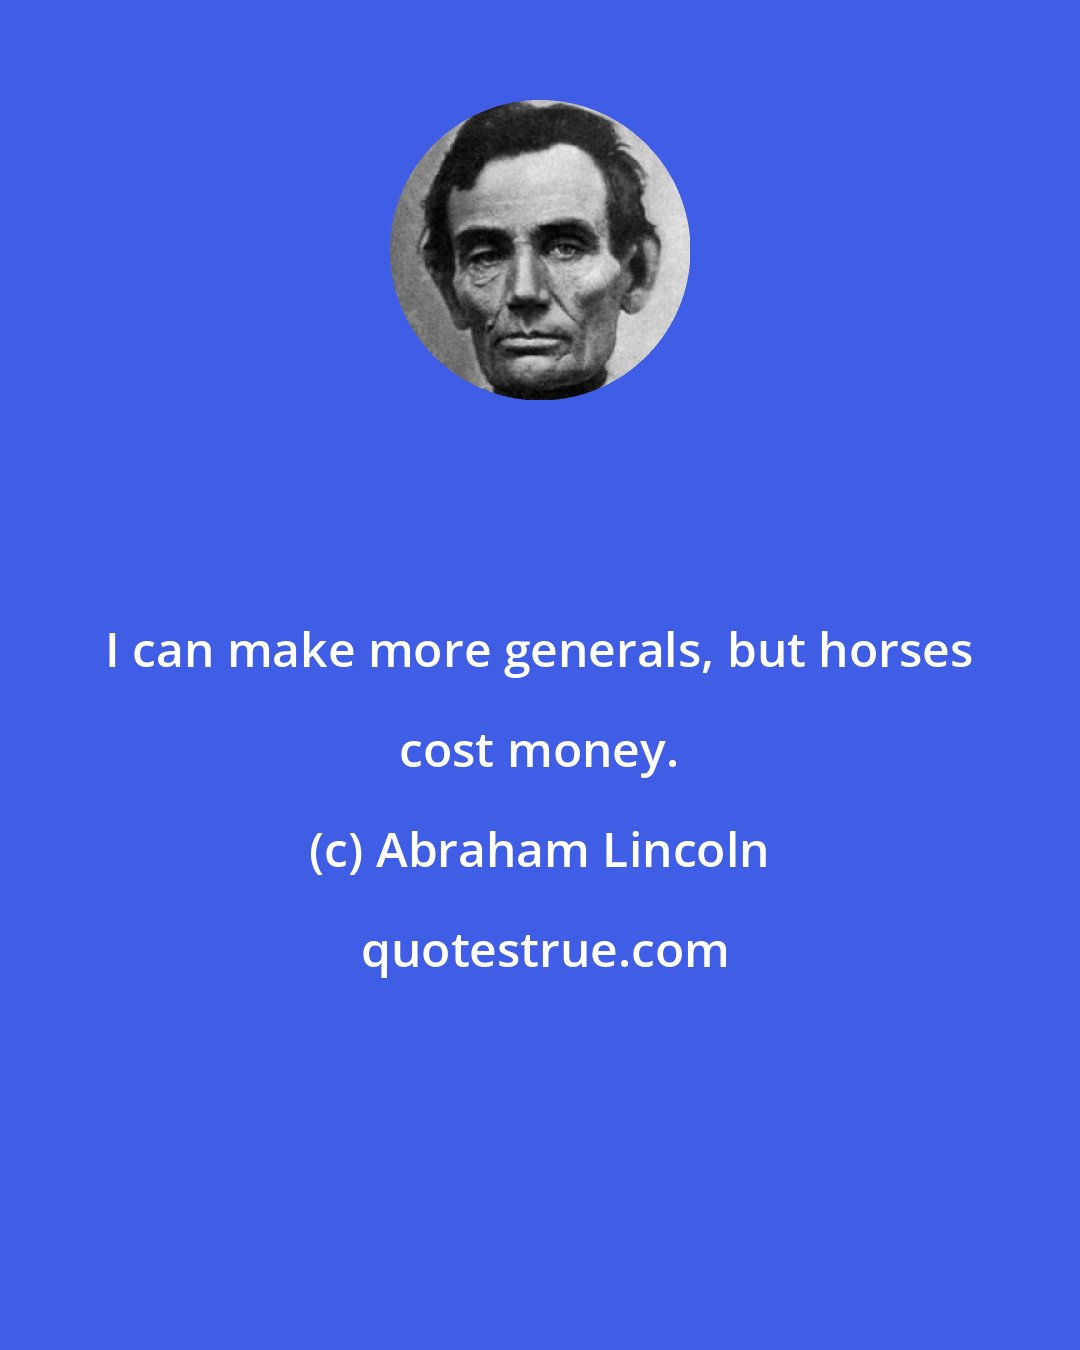 Abraham Lincoln: I can make more generals, but horses cost money.